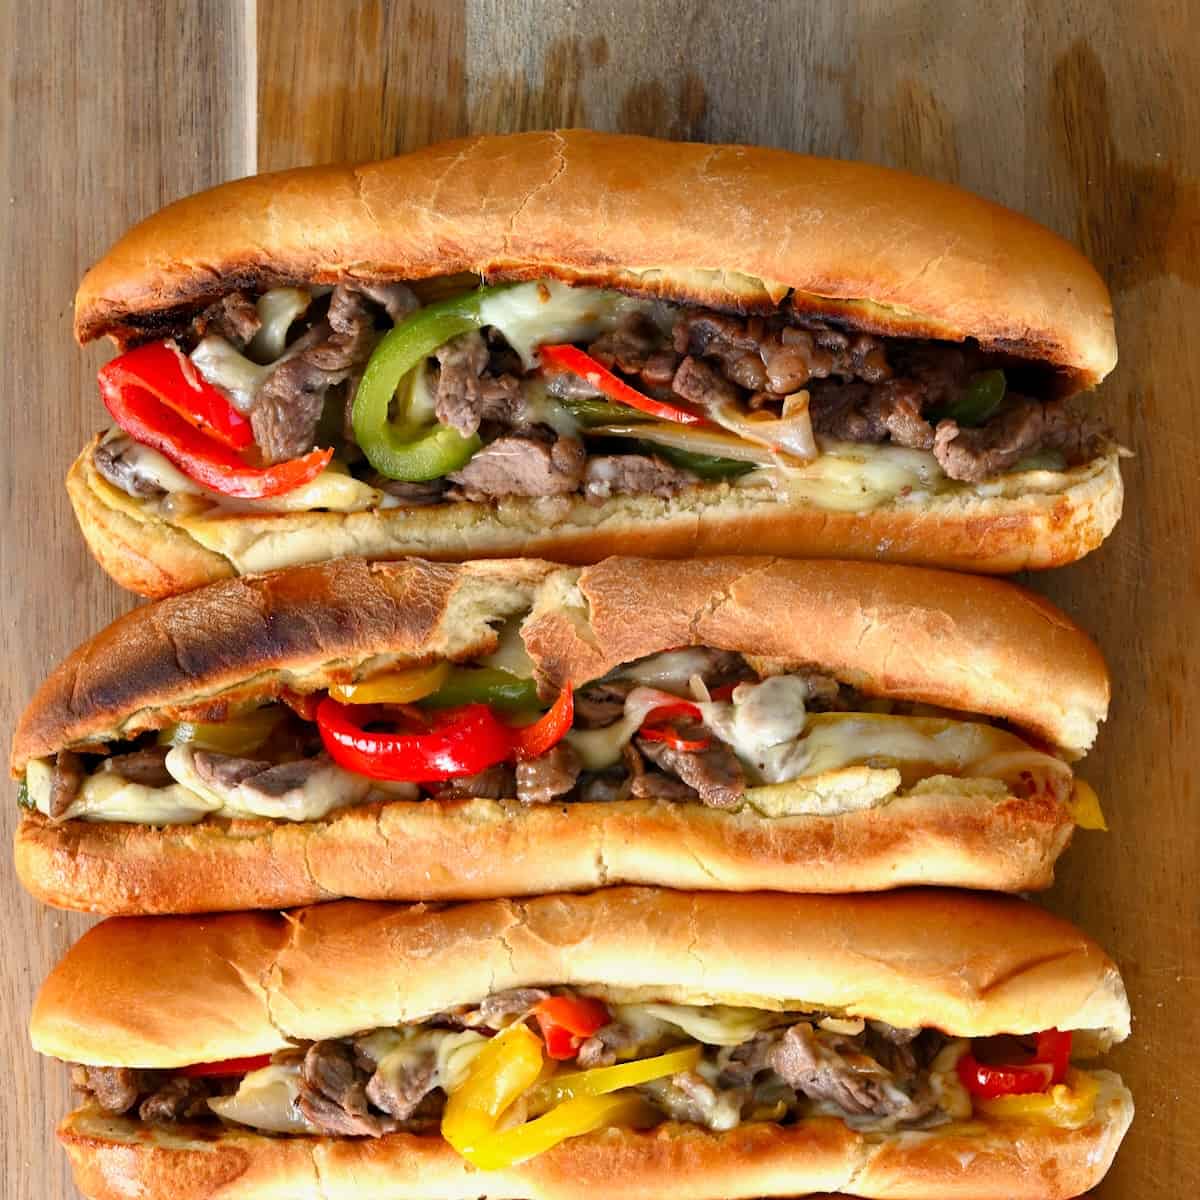 Four Philly cheesesteak sandwiches with melted cheese and peppers